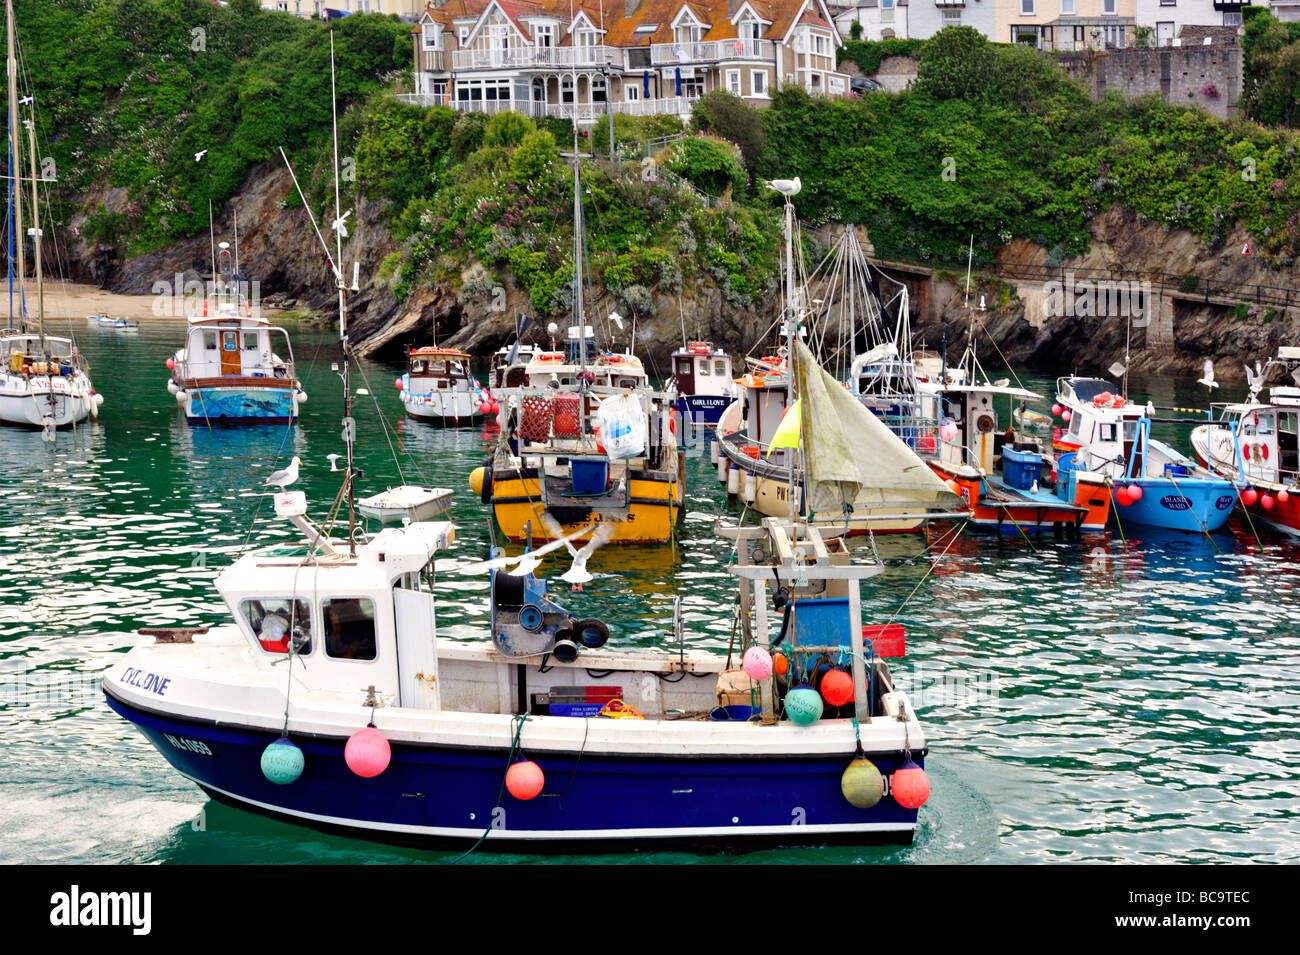 NEWQUAY, CORNWALL, UK - JUNE 10, 2009:  View of small boats in Newquay Harbour Stock Photo